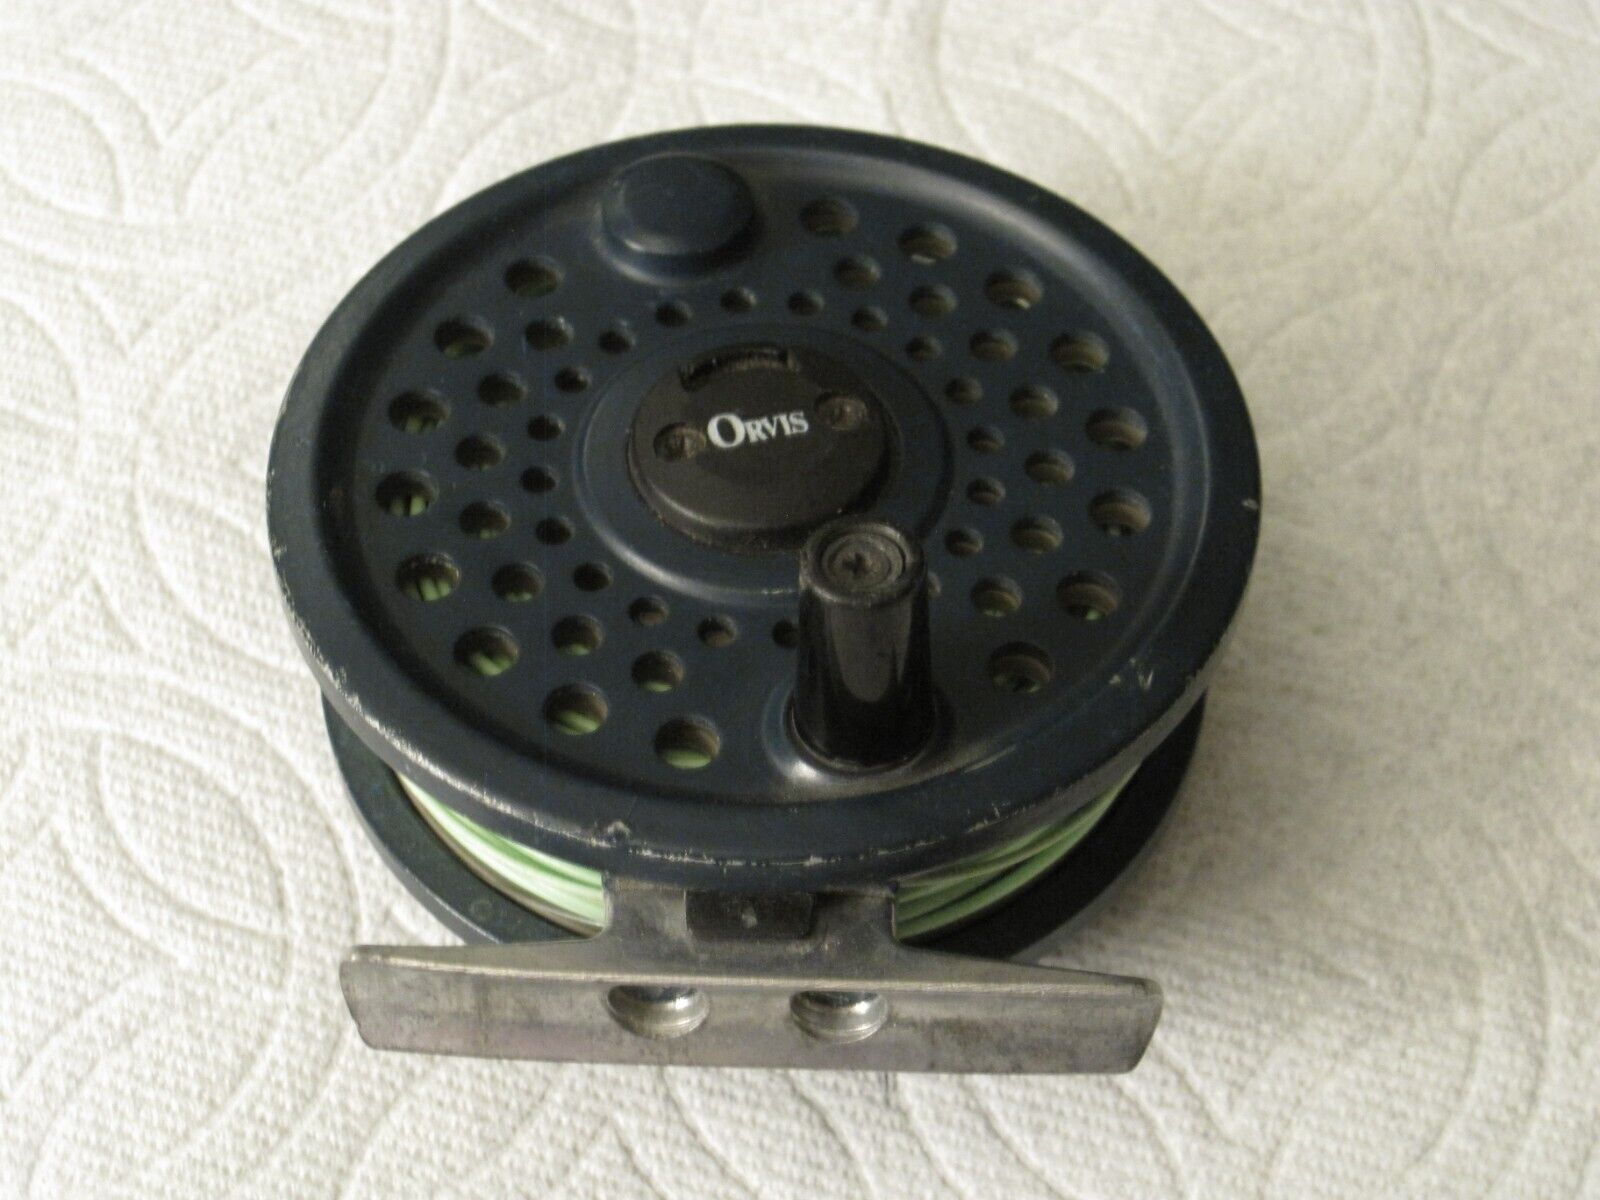 ROCKY MOUNTAIN 3/4 FLY FISHING REEL -- MADE IN ENGLAND -- FREE SHIPPING!!!